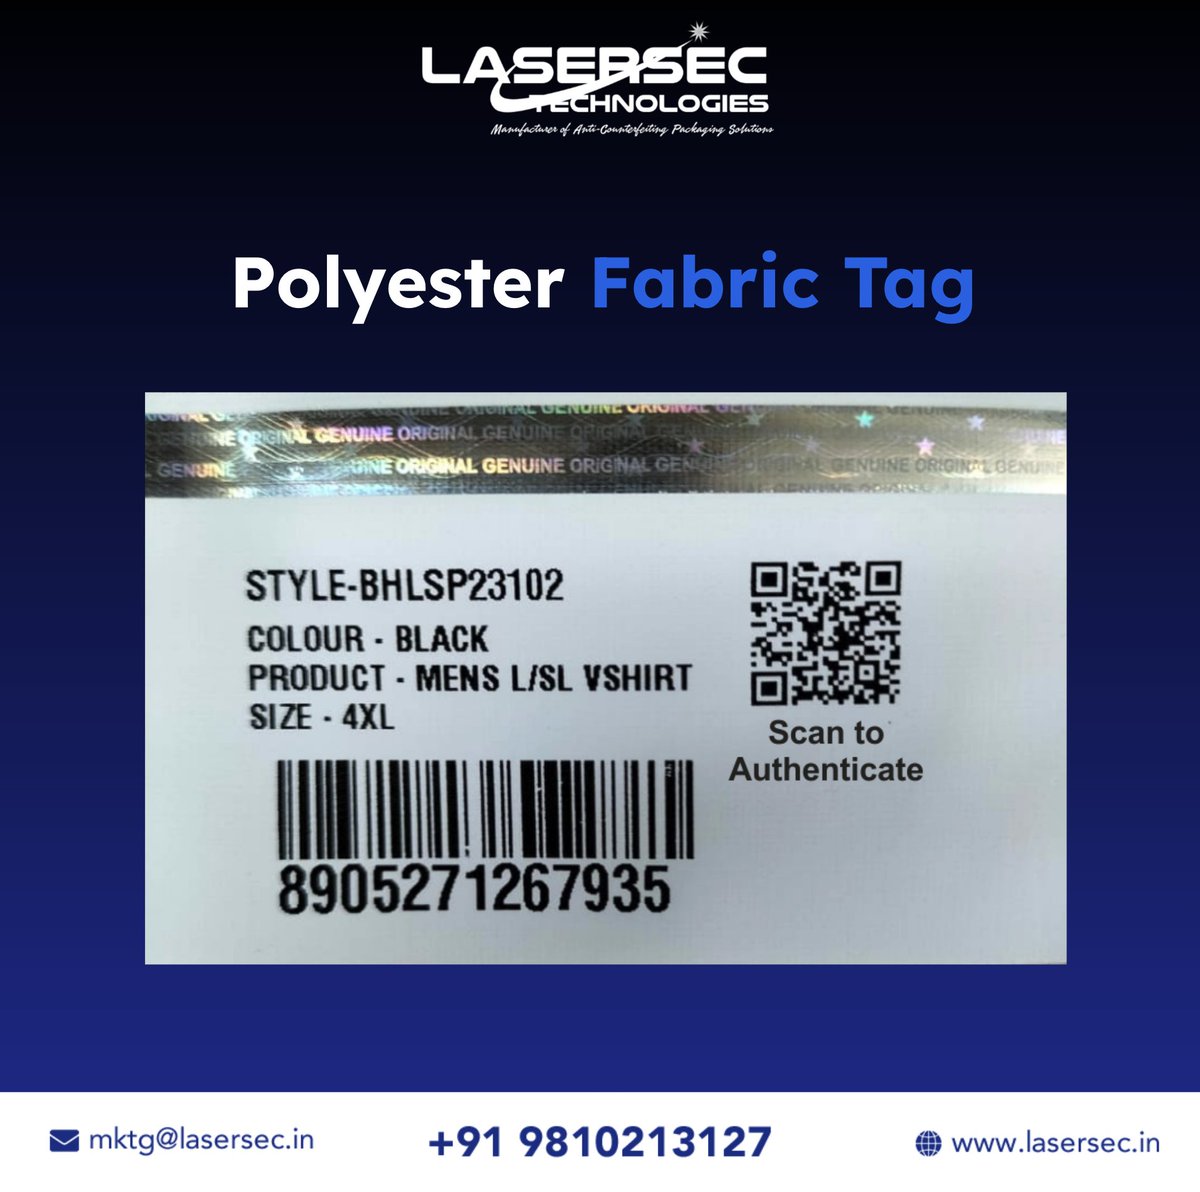 ❇️ Dive into apparel innovation! Explore the polyester fabric tag reshaping garment labeling & authenticity. 

Discover benefits for consumers & manufacturers

Read More -----> bit.ly/Apparel_Counte… 
.
.
#Lasersec #packaging #productpackaging #anticounterfeit